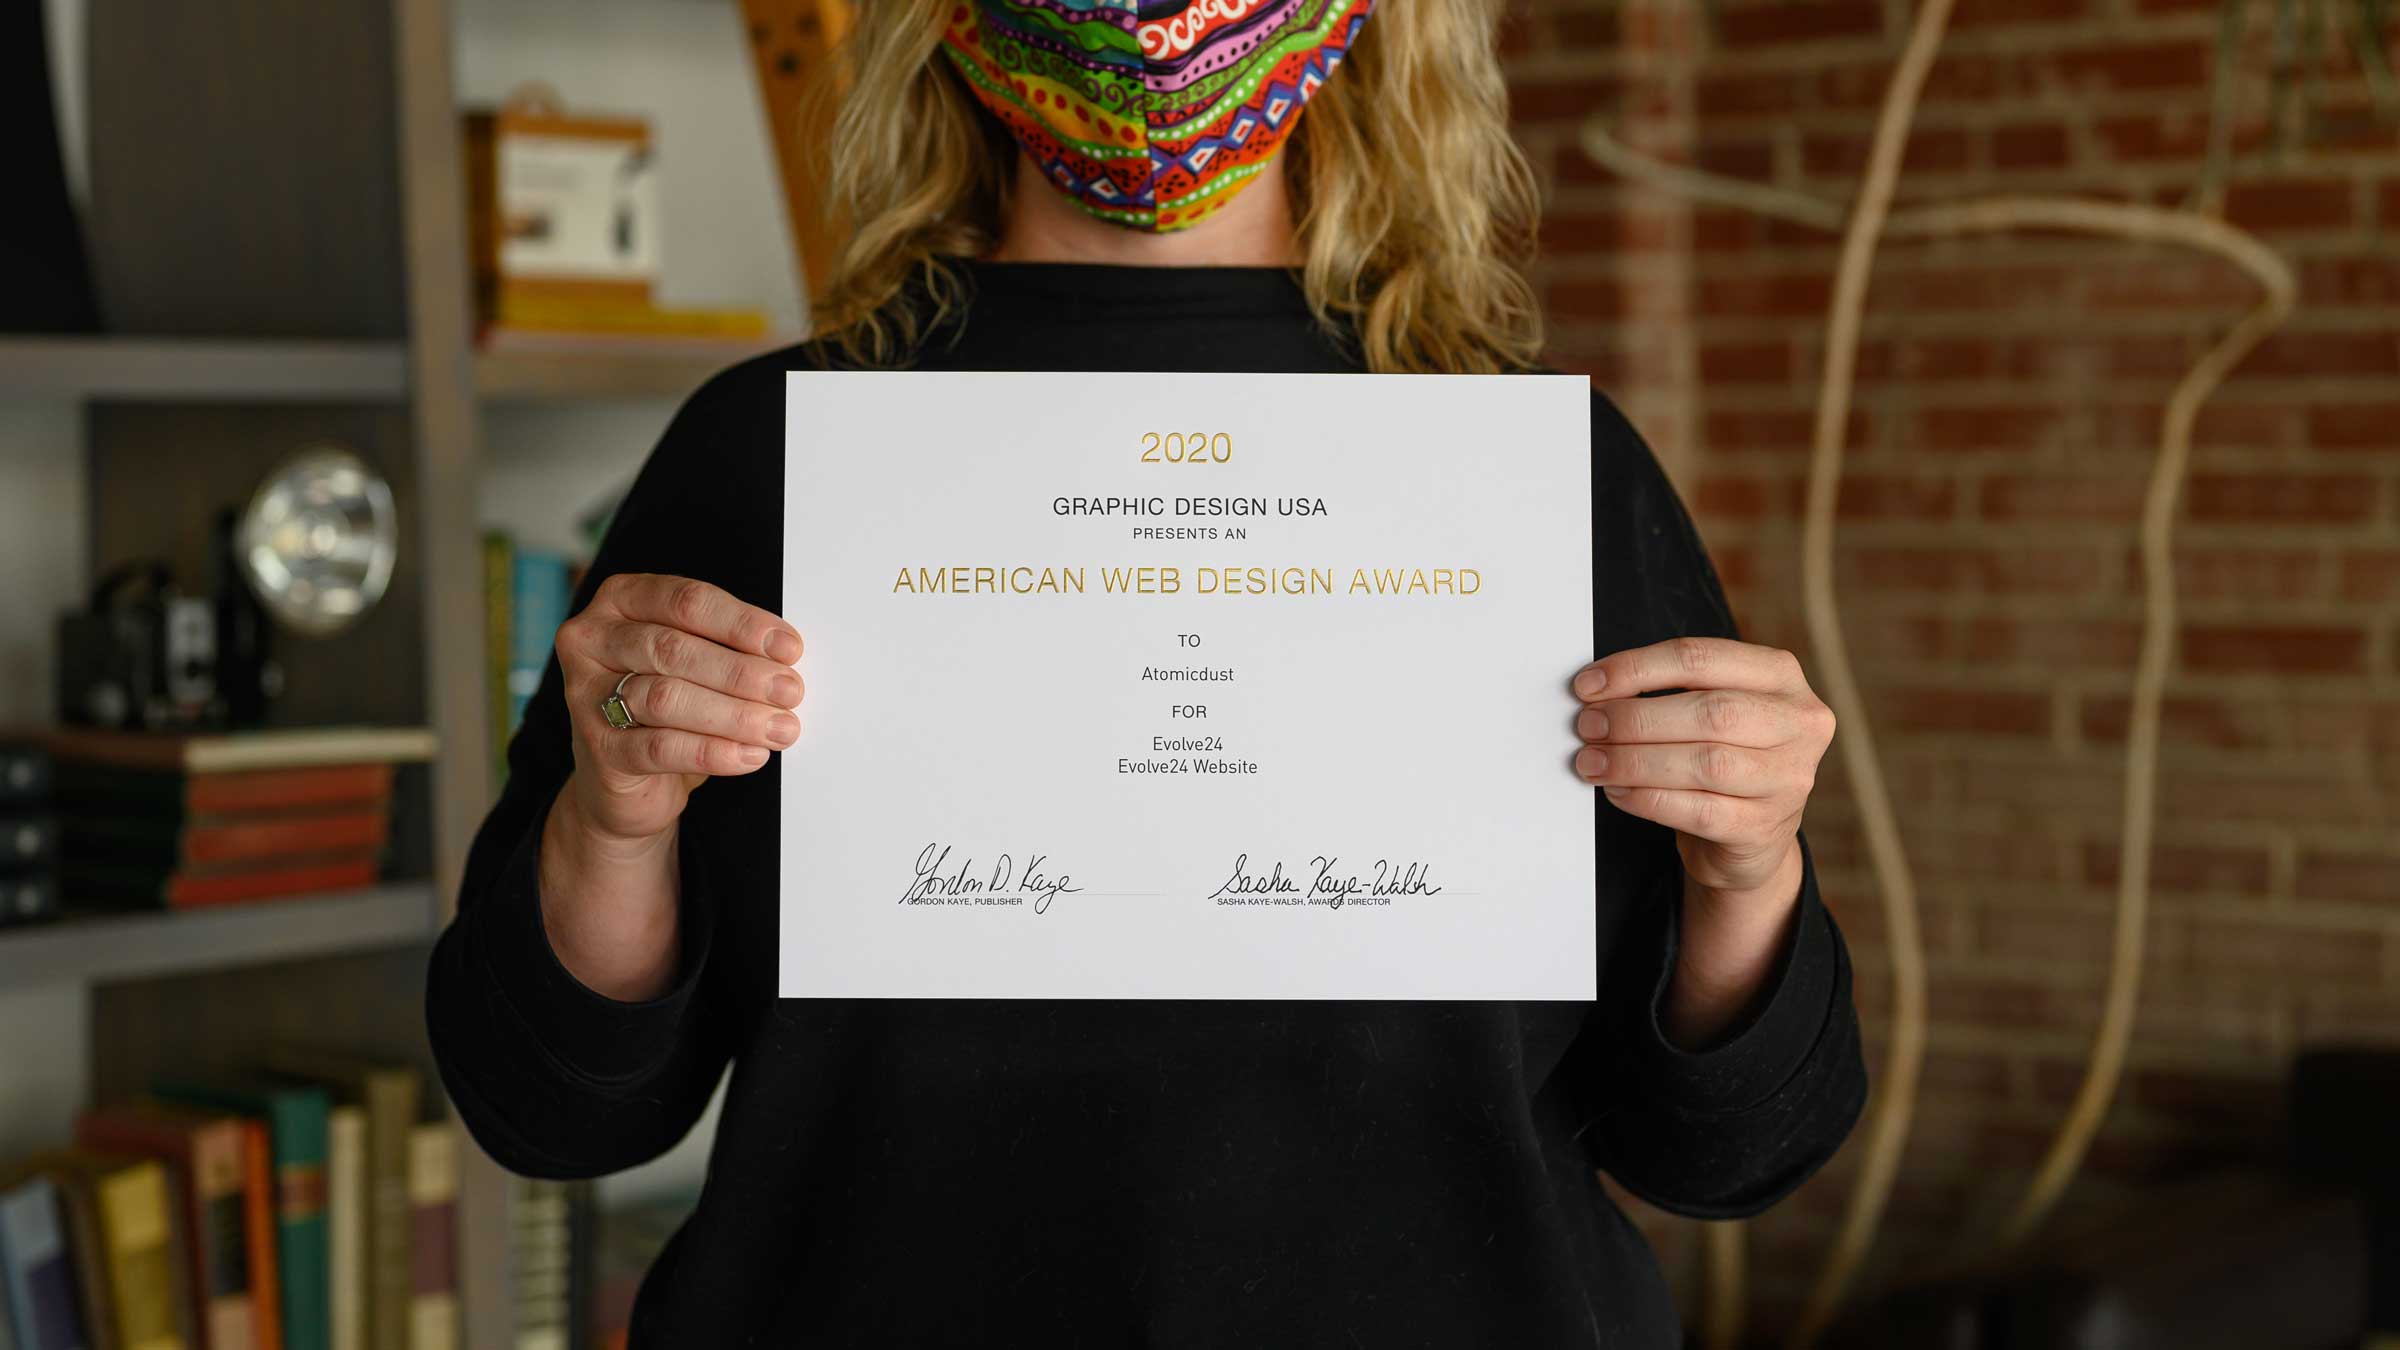 An Atomicdust team member holds a certificate from GDUSA's 2020 American Web Design Awards